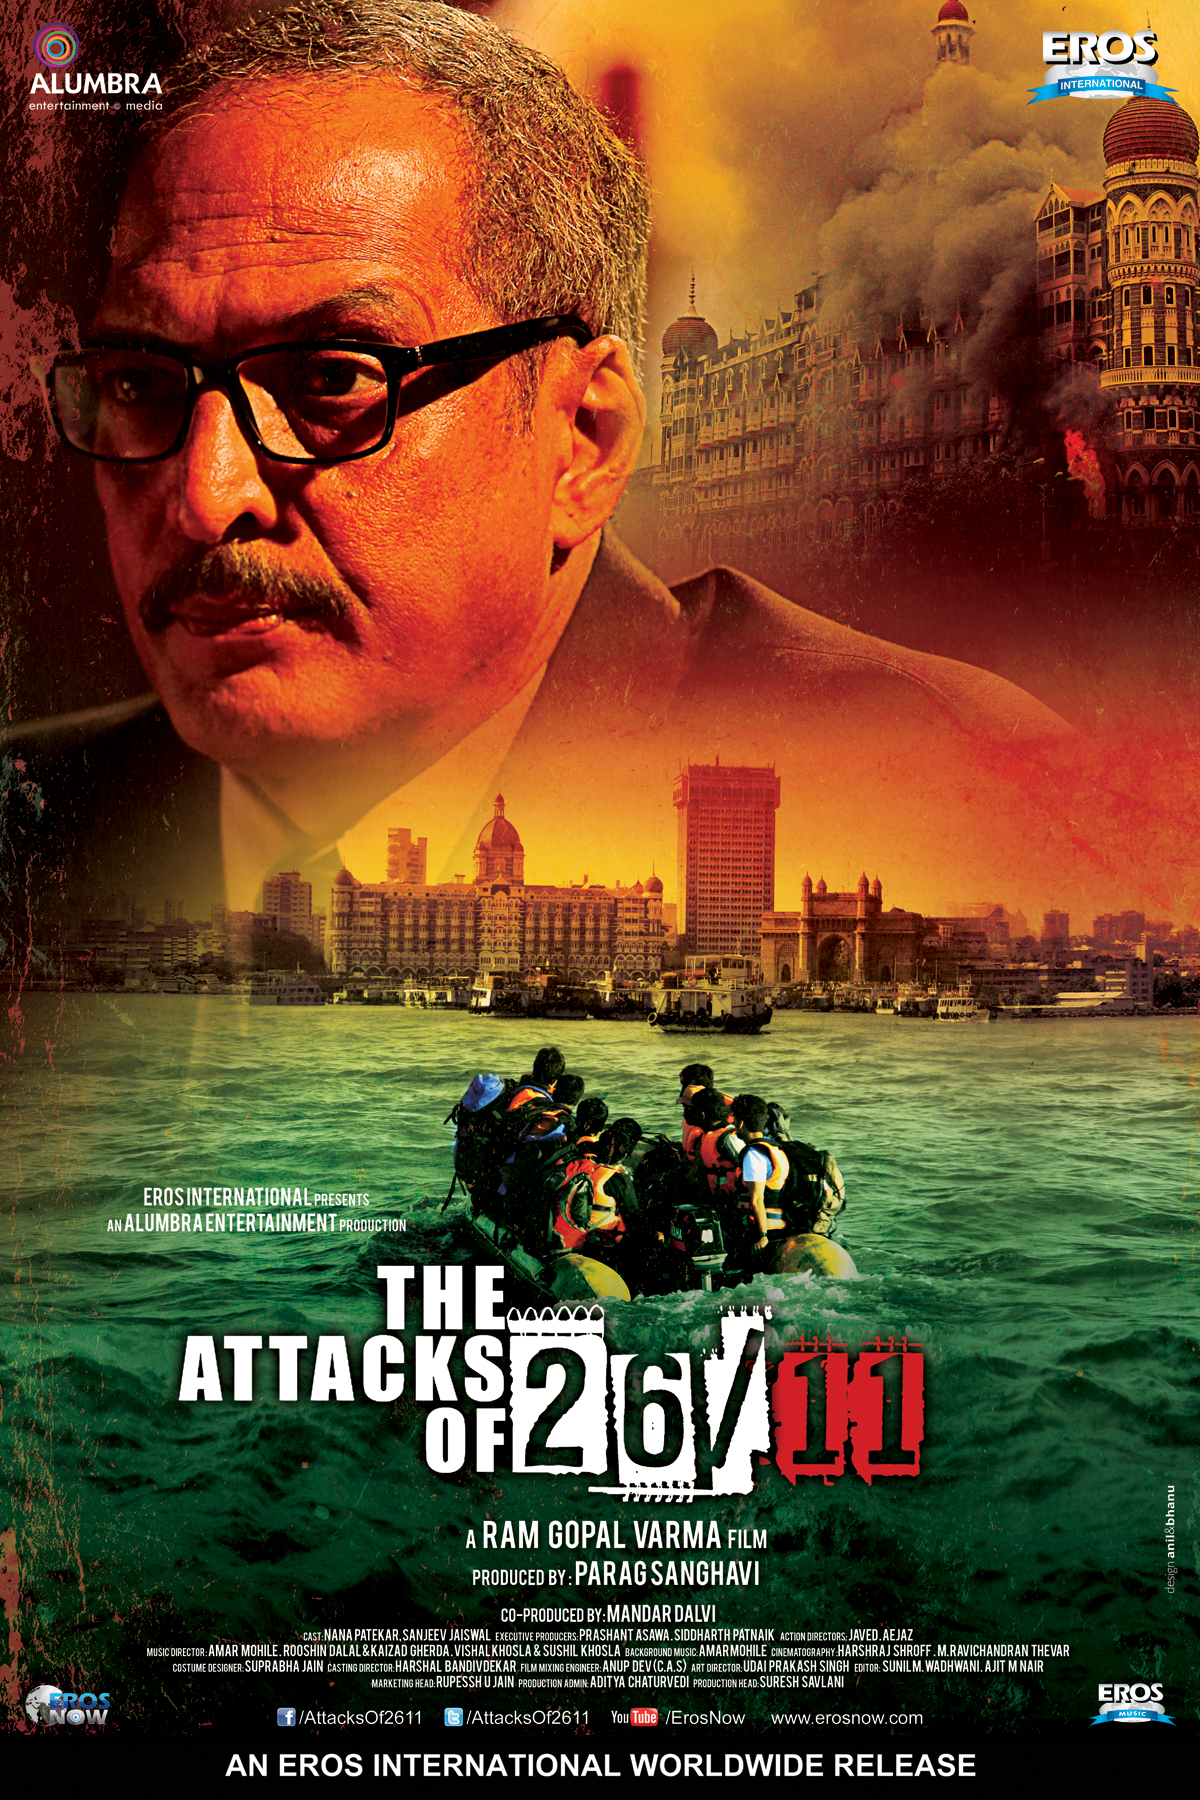 RGV as Completed the Final Copy of ‘The Attacks of 26/11’